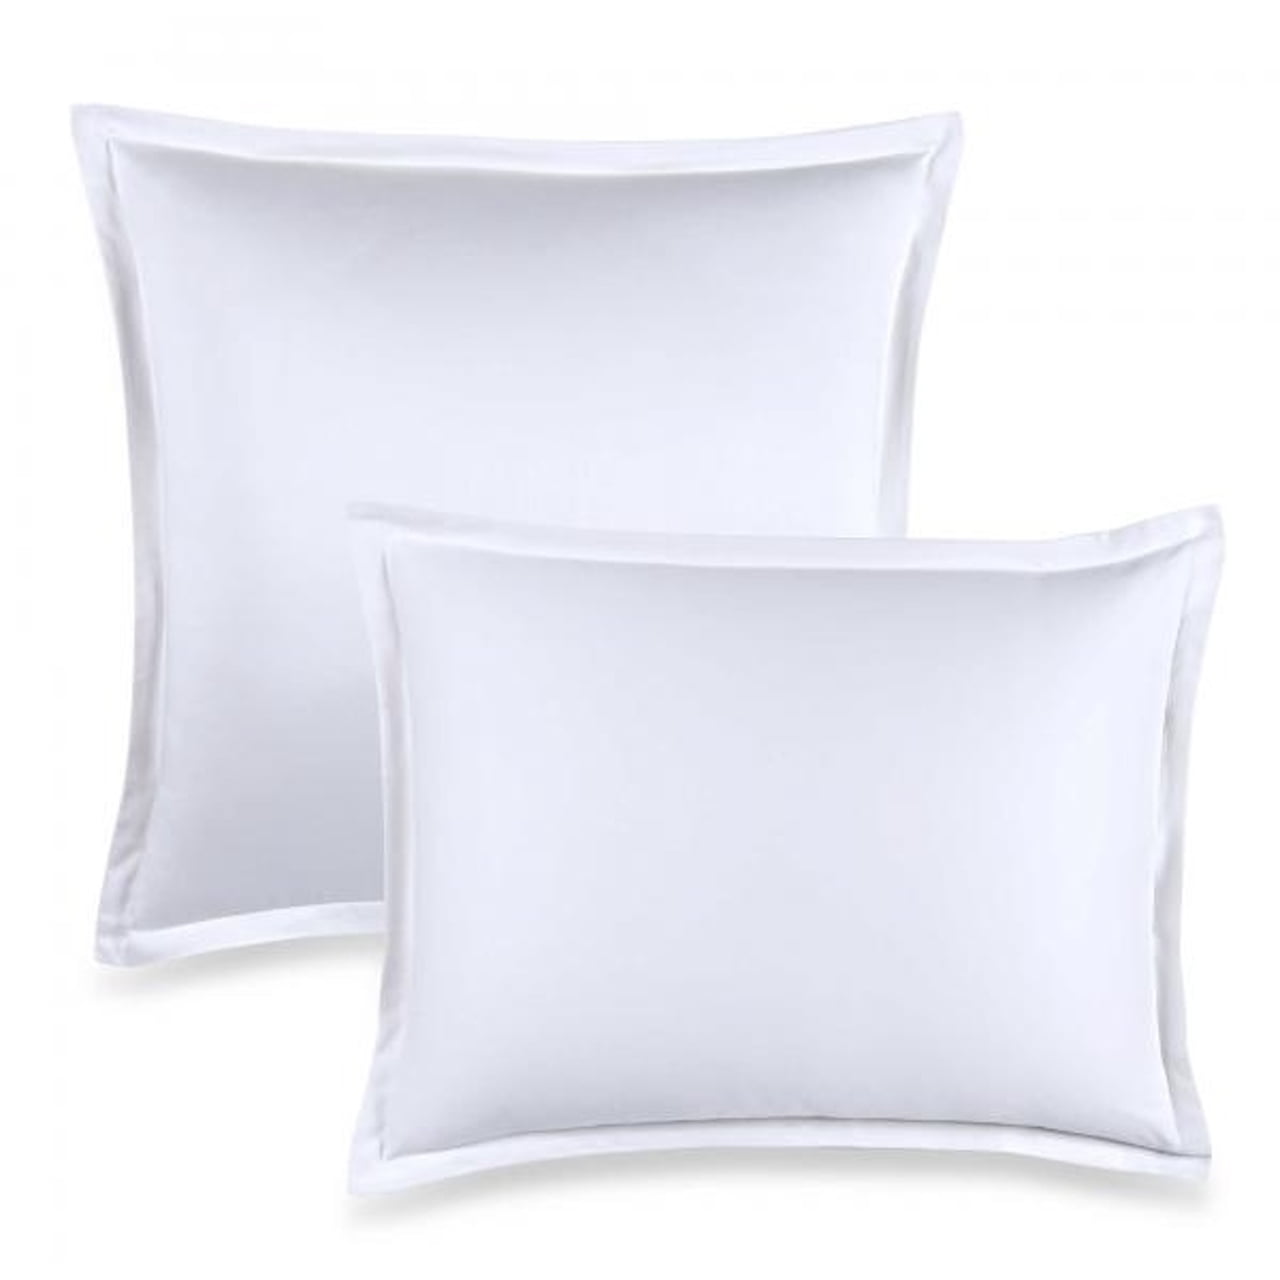 Pillow sham Set of 2 Silver Grey Solid 800 Thread Count Superking Size Envelope Closure Pillow Cover 20x36 Breathable & Smooth Feel Long Staple Sateen Weave Silky Soft Natural Cotton